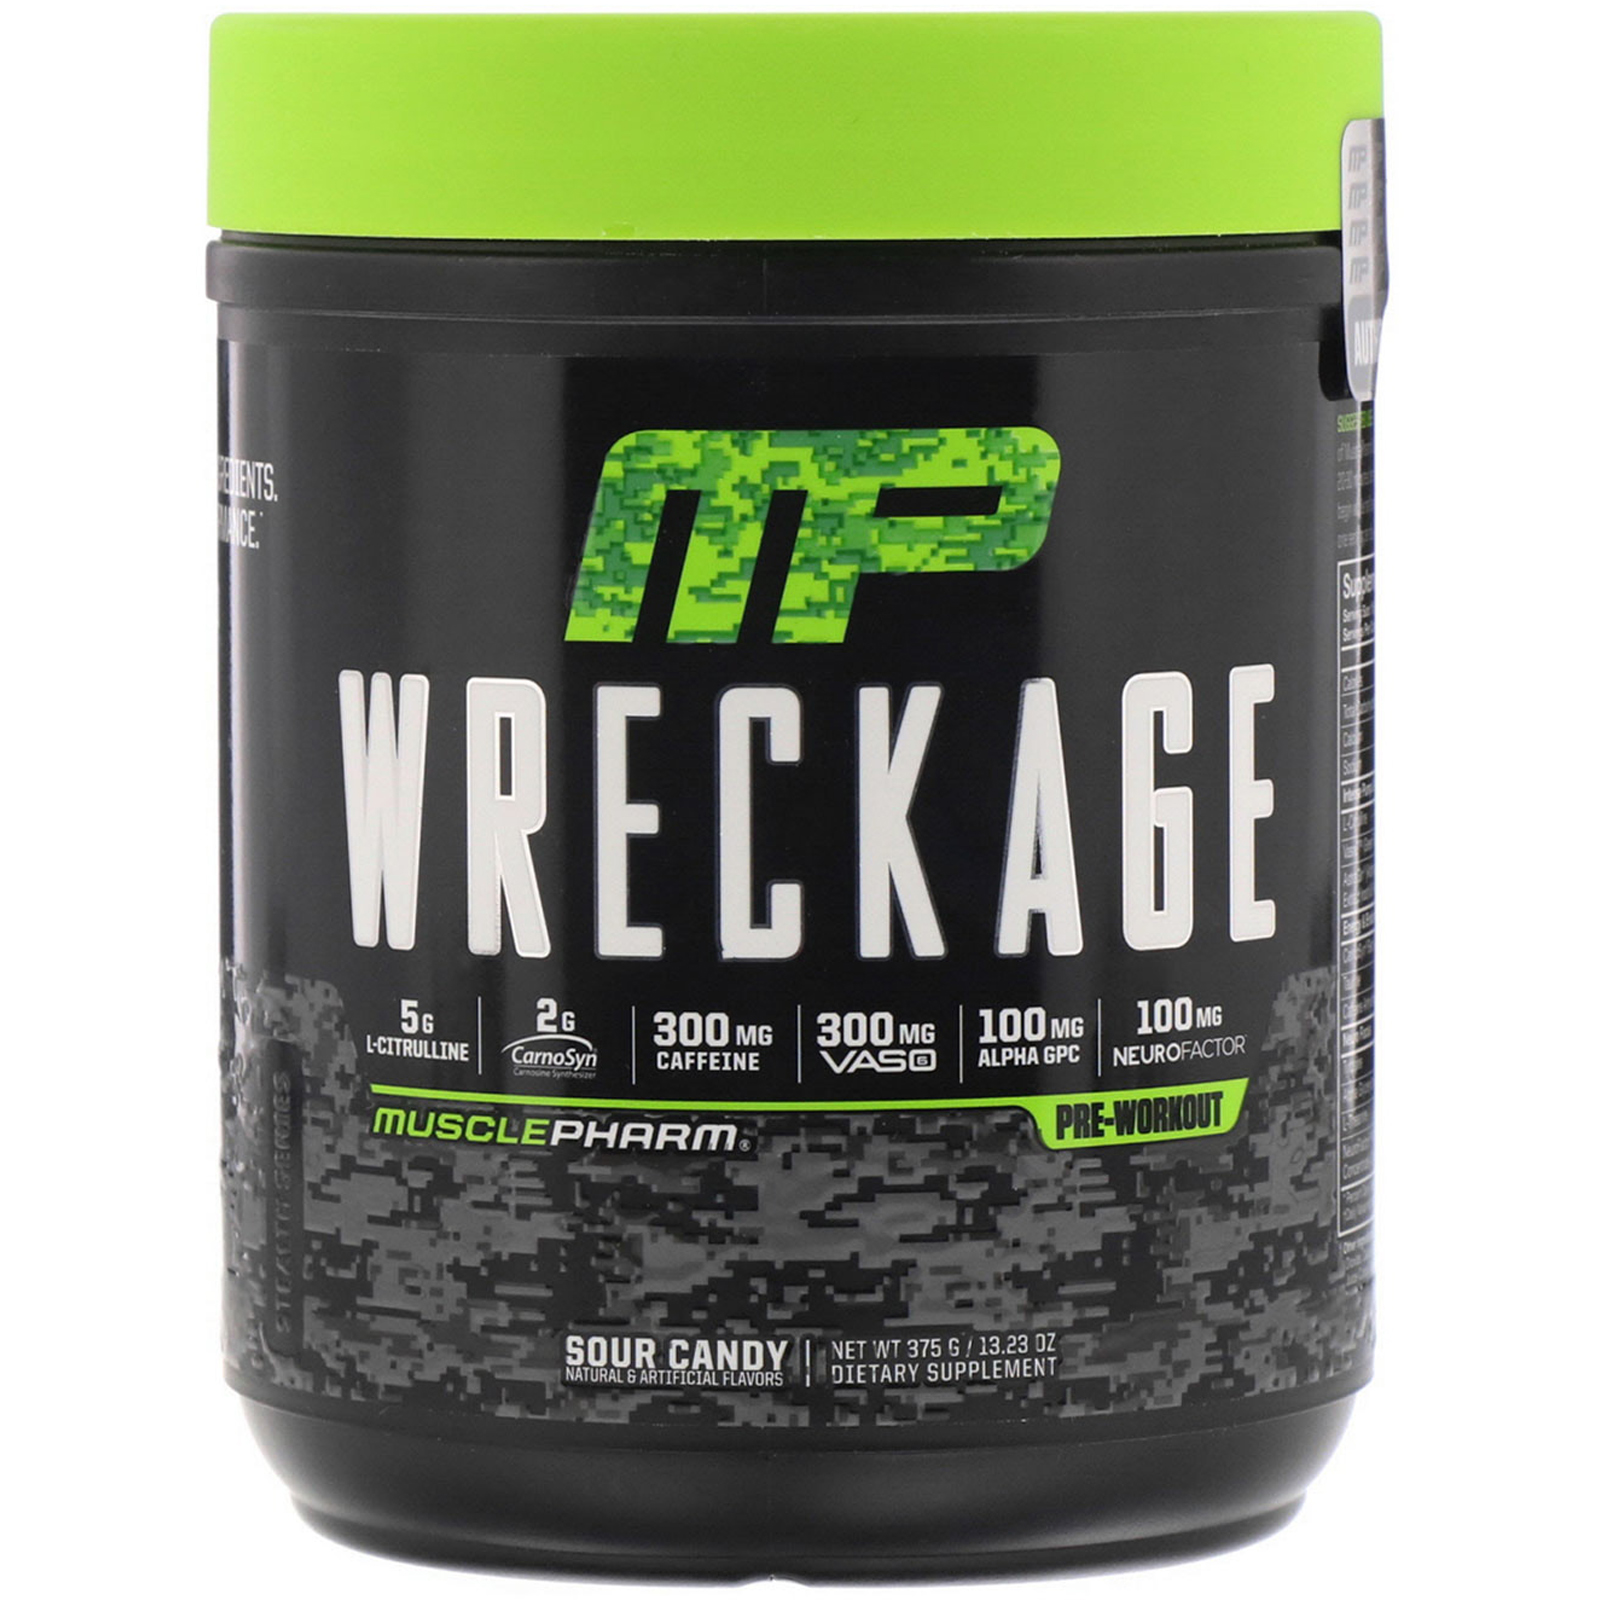 6 Day Musclepharm Pre Workout Wreckage for Gym